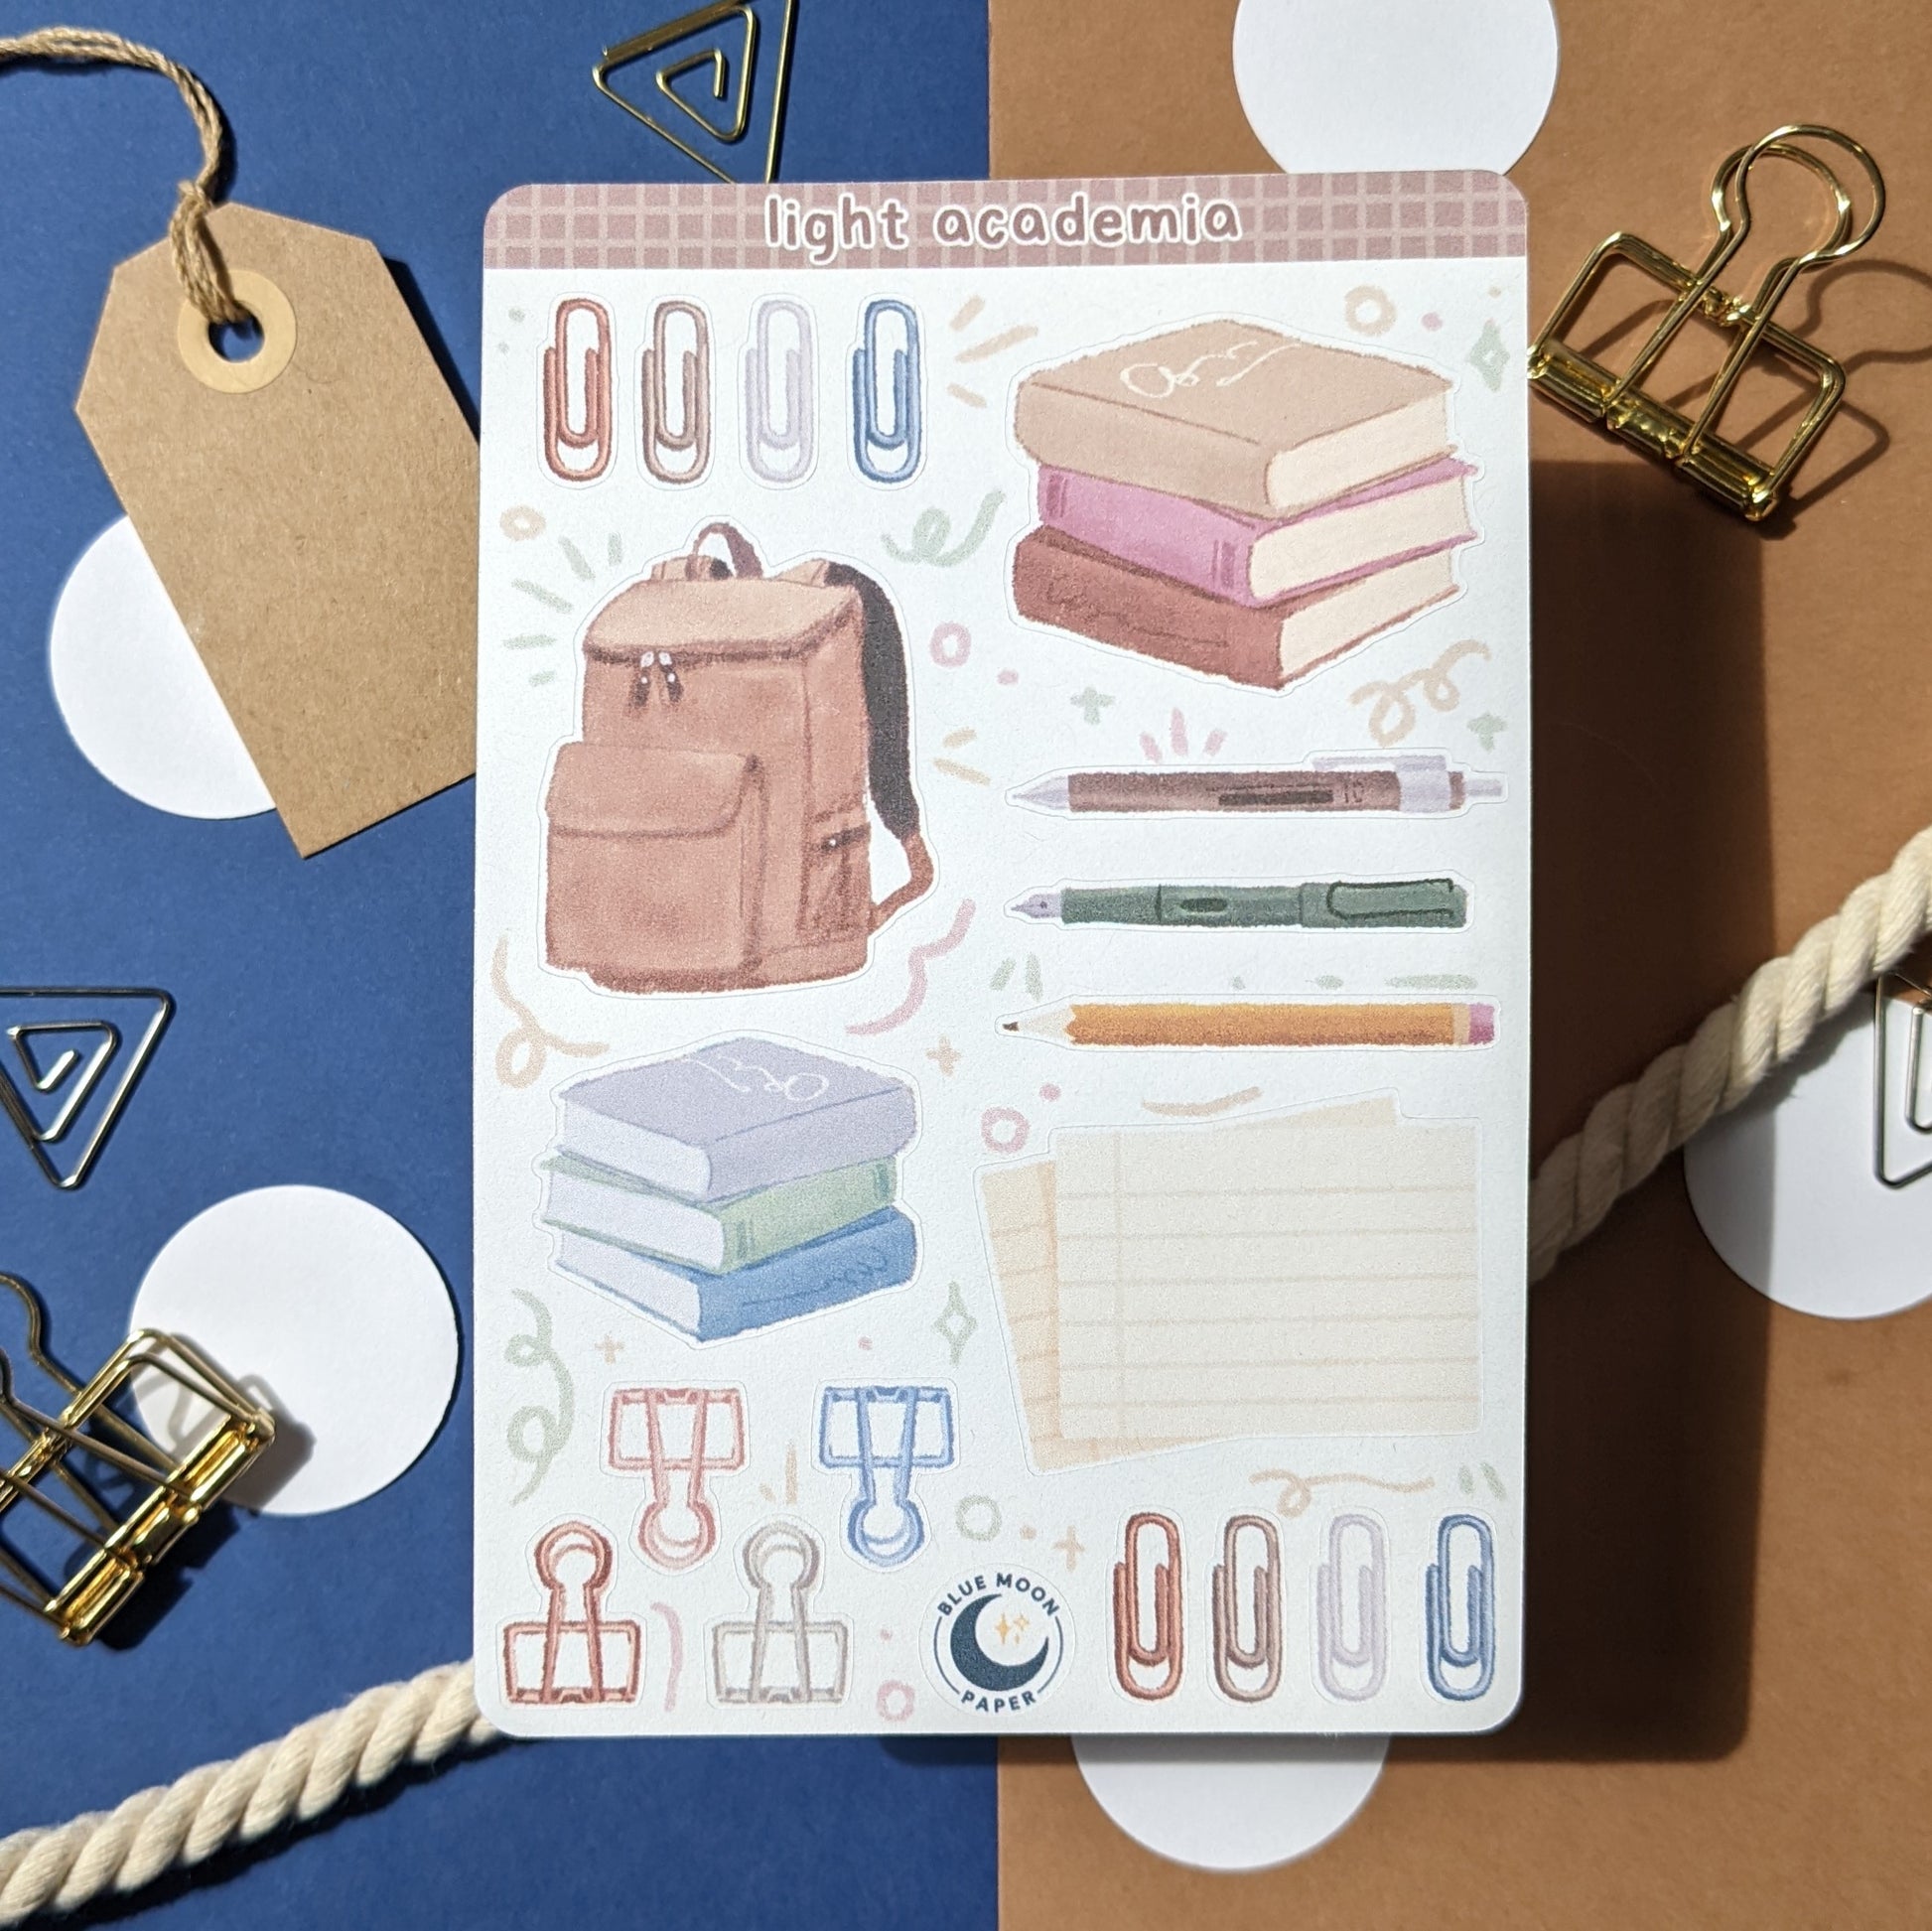 Sticker sheet with academic elements on it such as stationery, books, and a backpack.